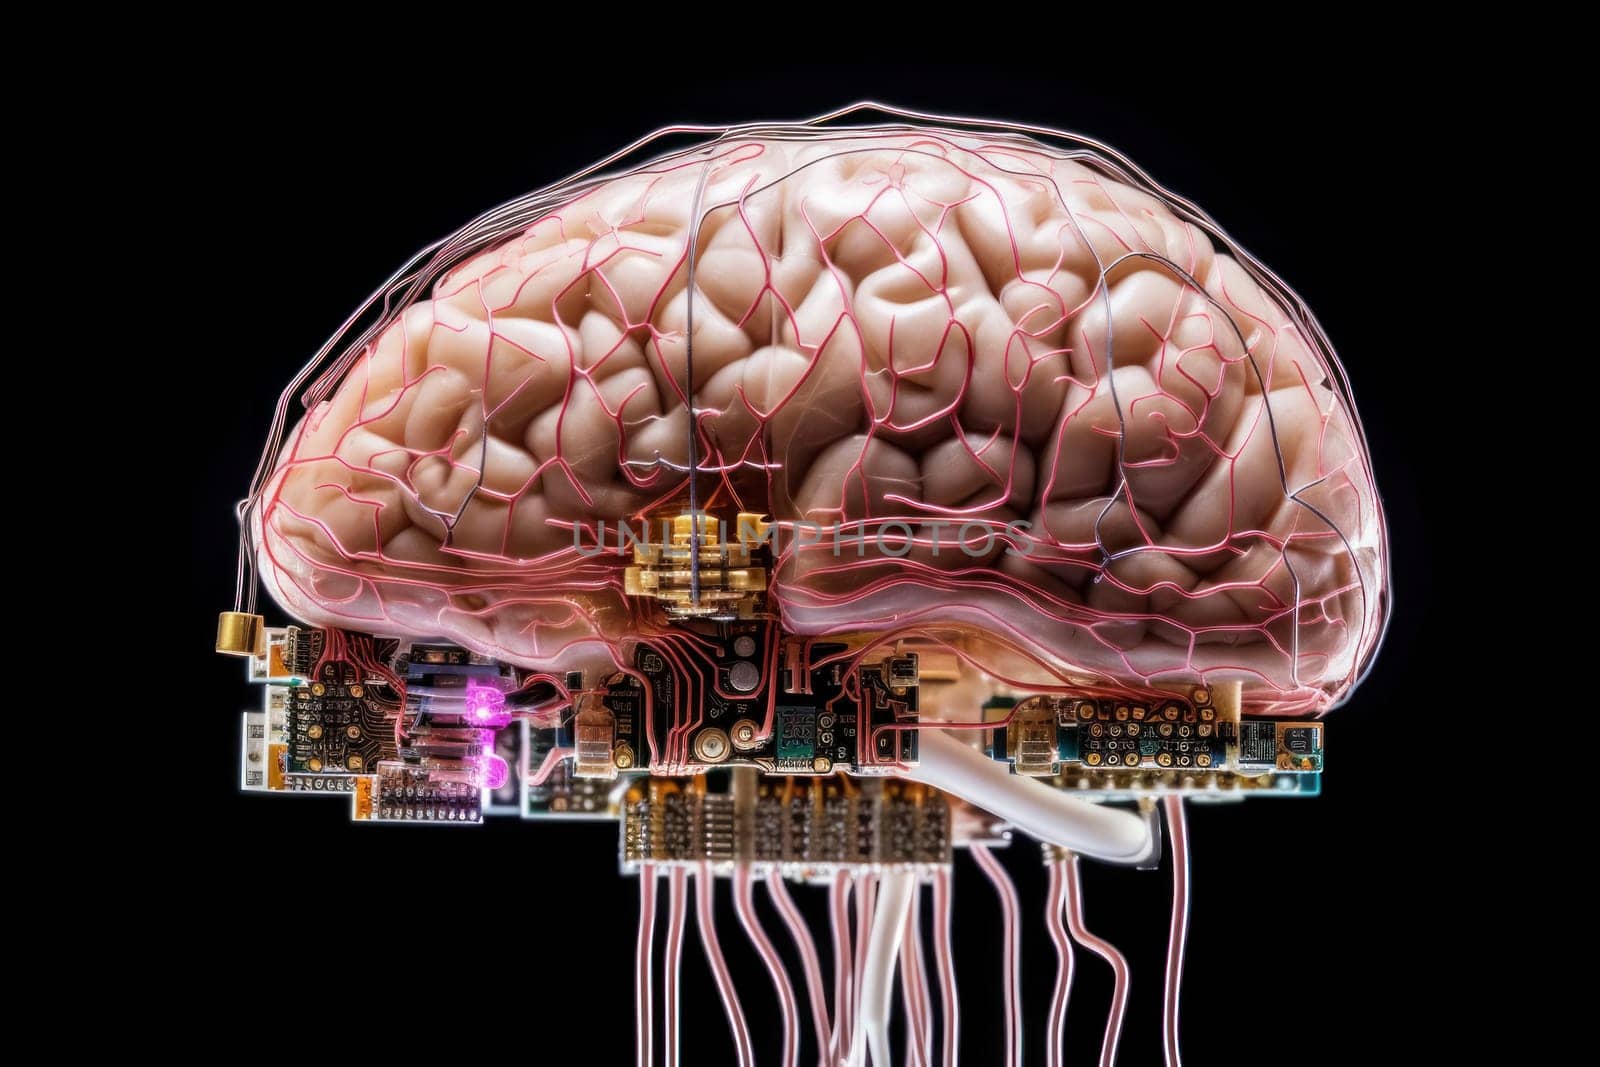 Human brain connected to intricate circuit boards and microchips by andreyz